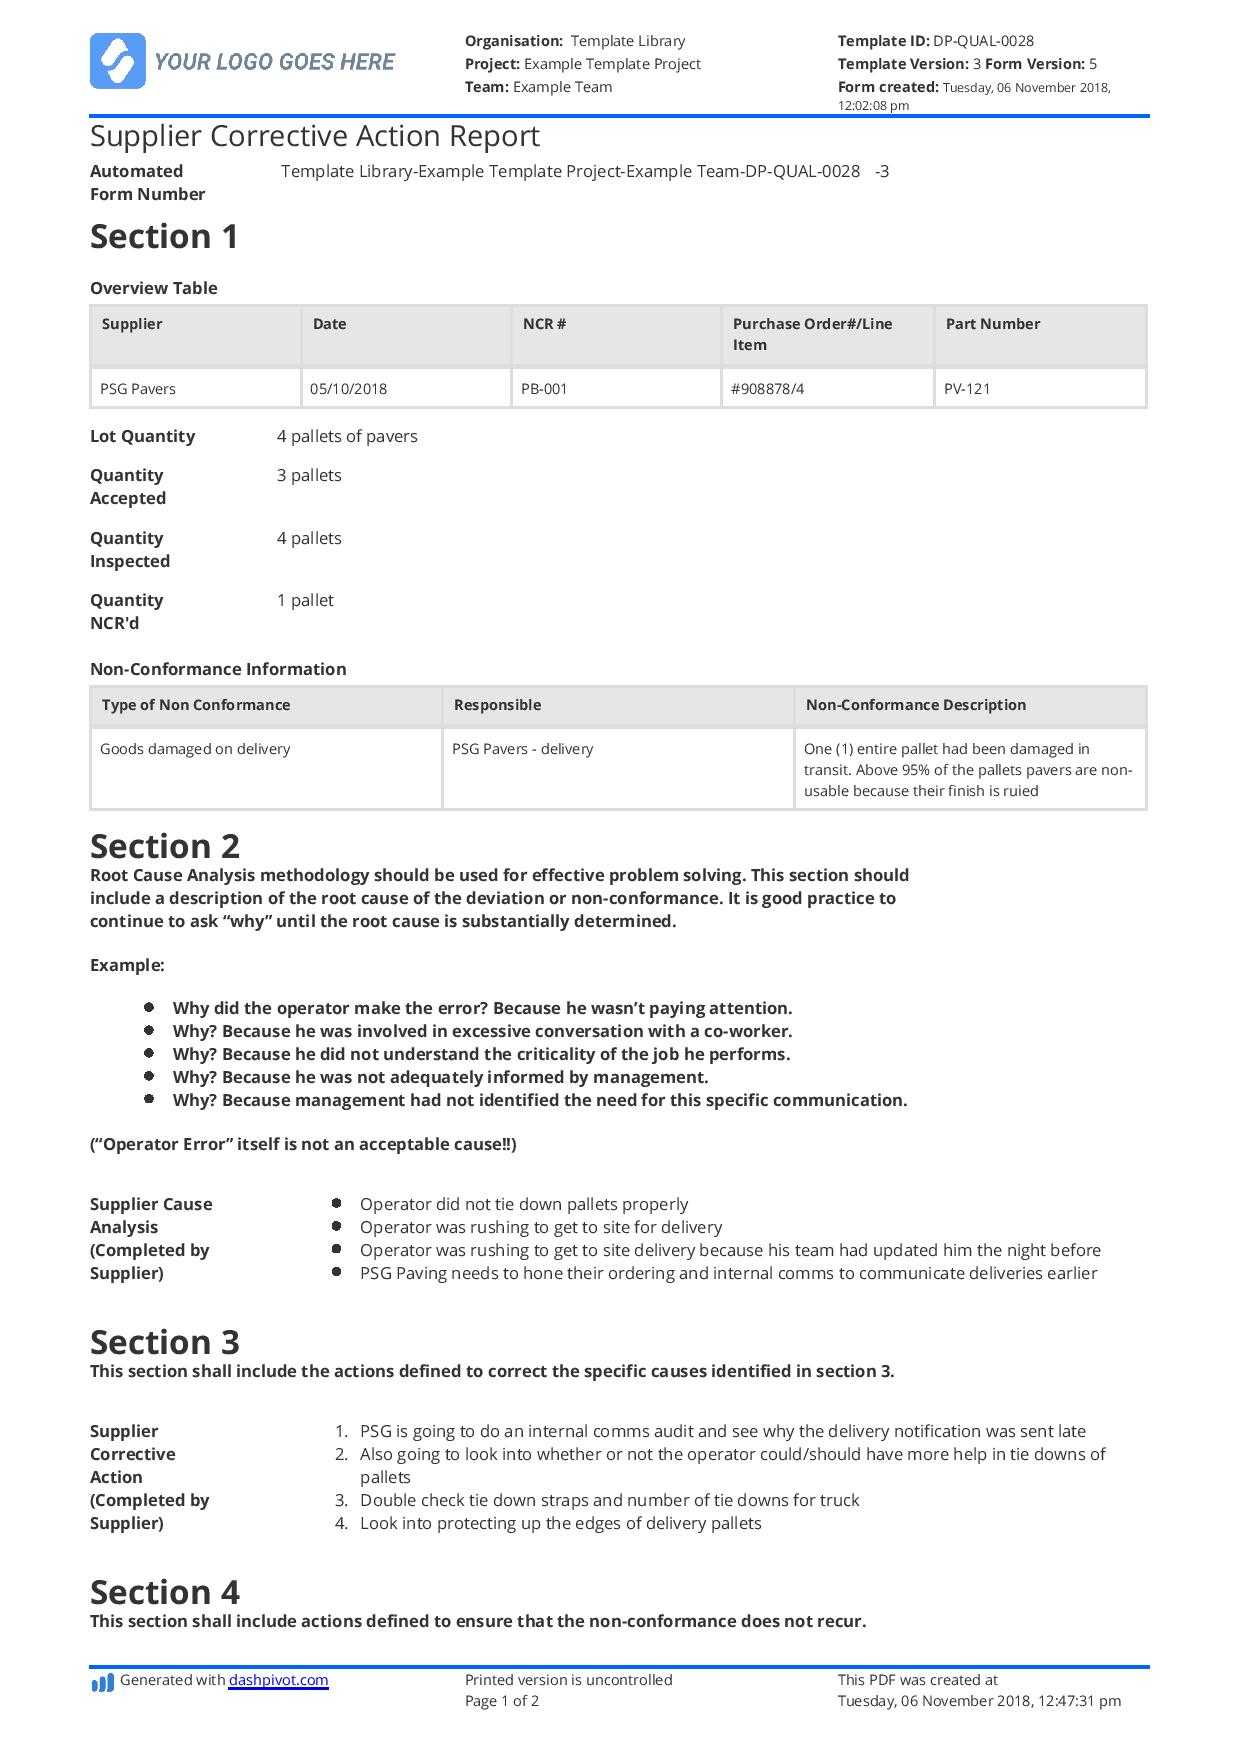 Supplier Corrective Action Report Template: Improve Your For Corrective Action Report Template